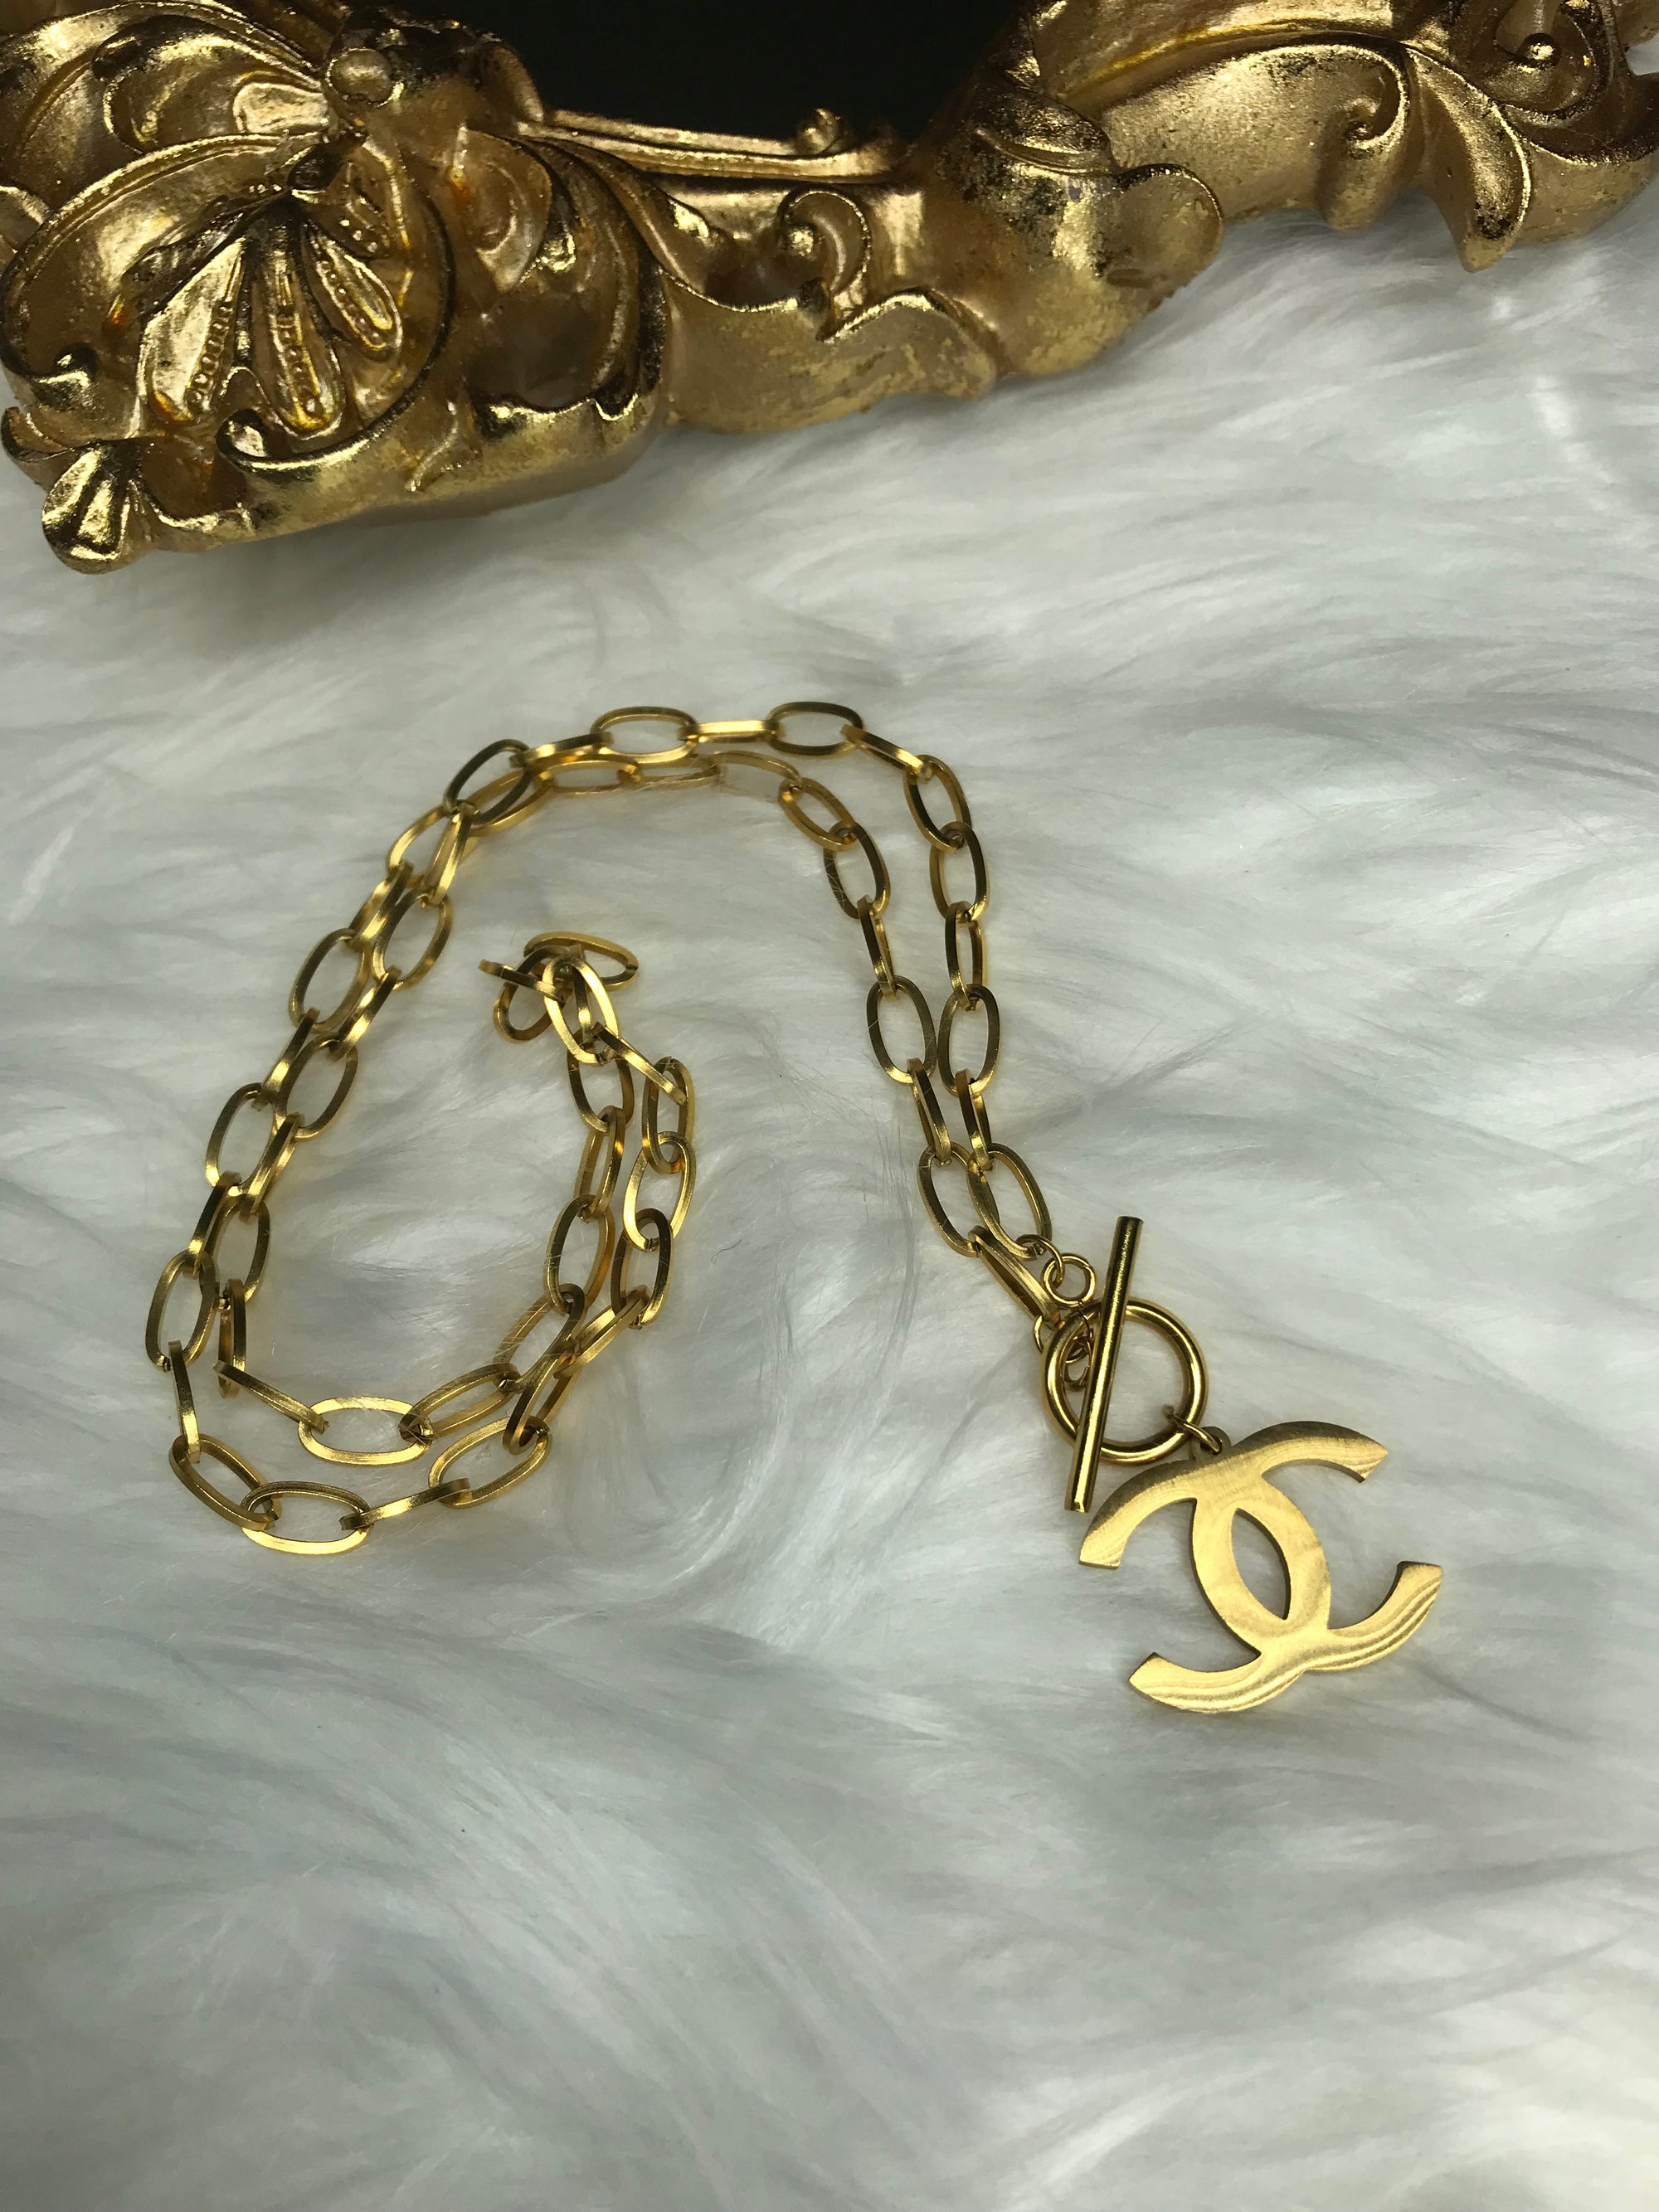 Repurposed / Reworked Chanel Charm Necklace - glamaristyles